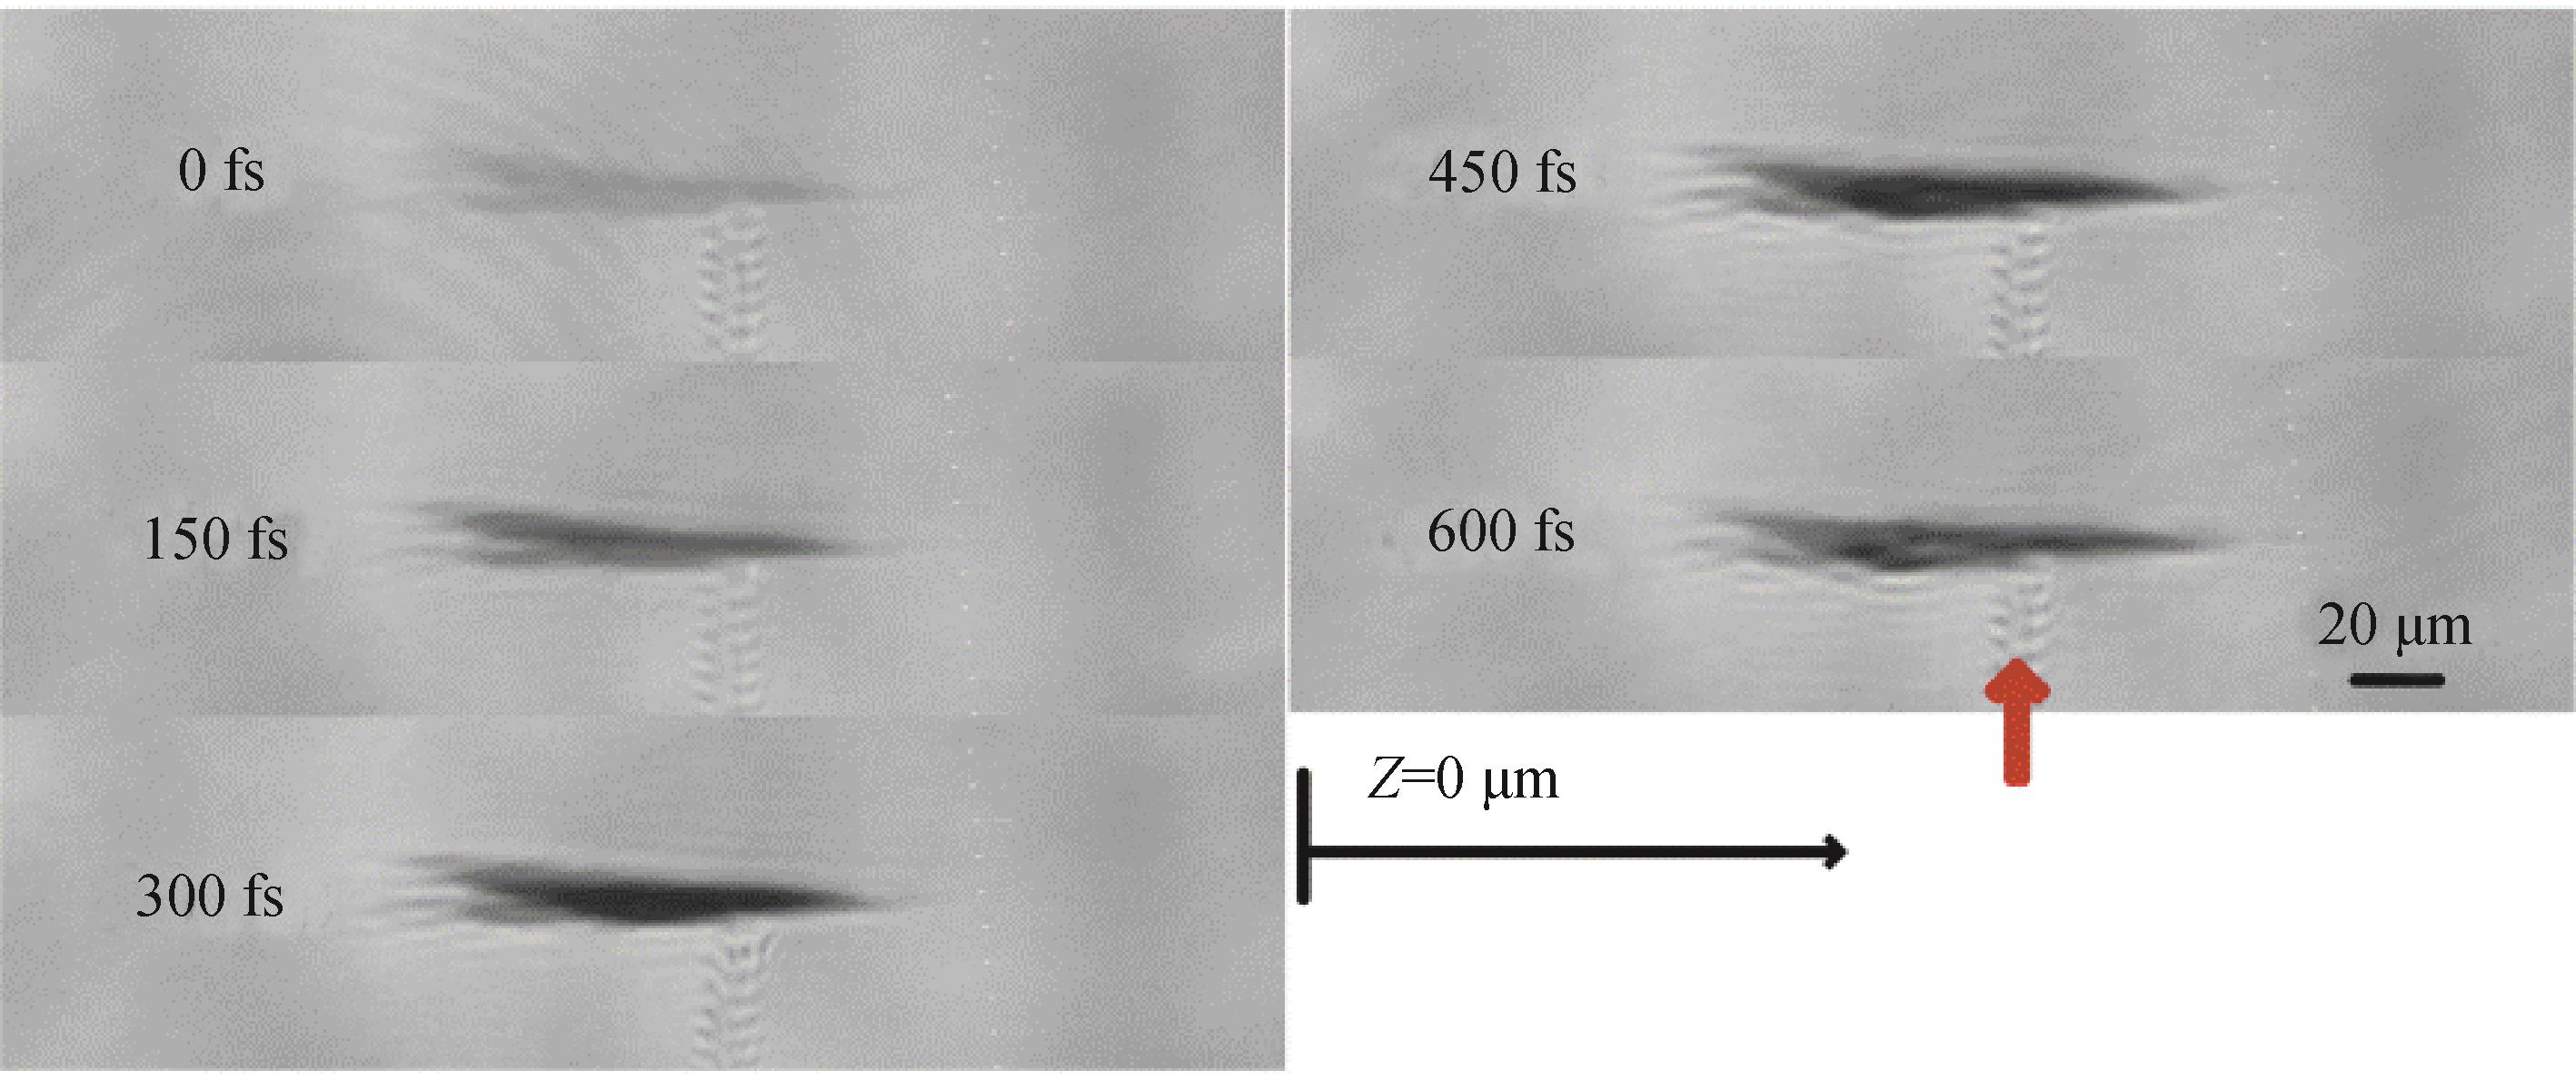 Time-resolved images of plasma induced by 16.0 μJ femtosecond laser in fused silica